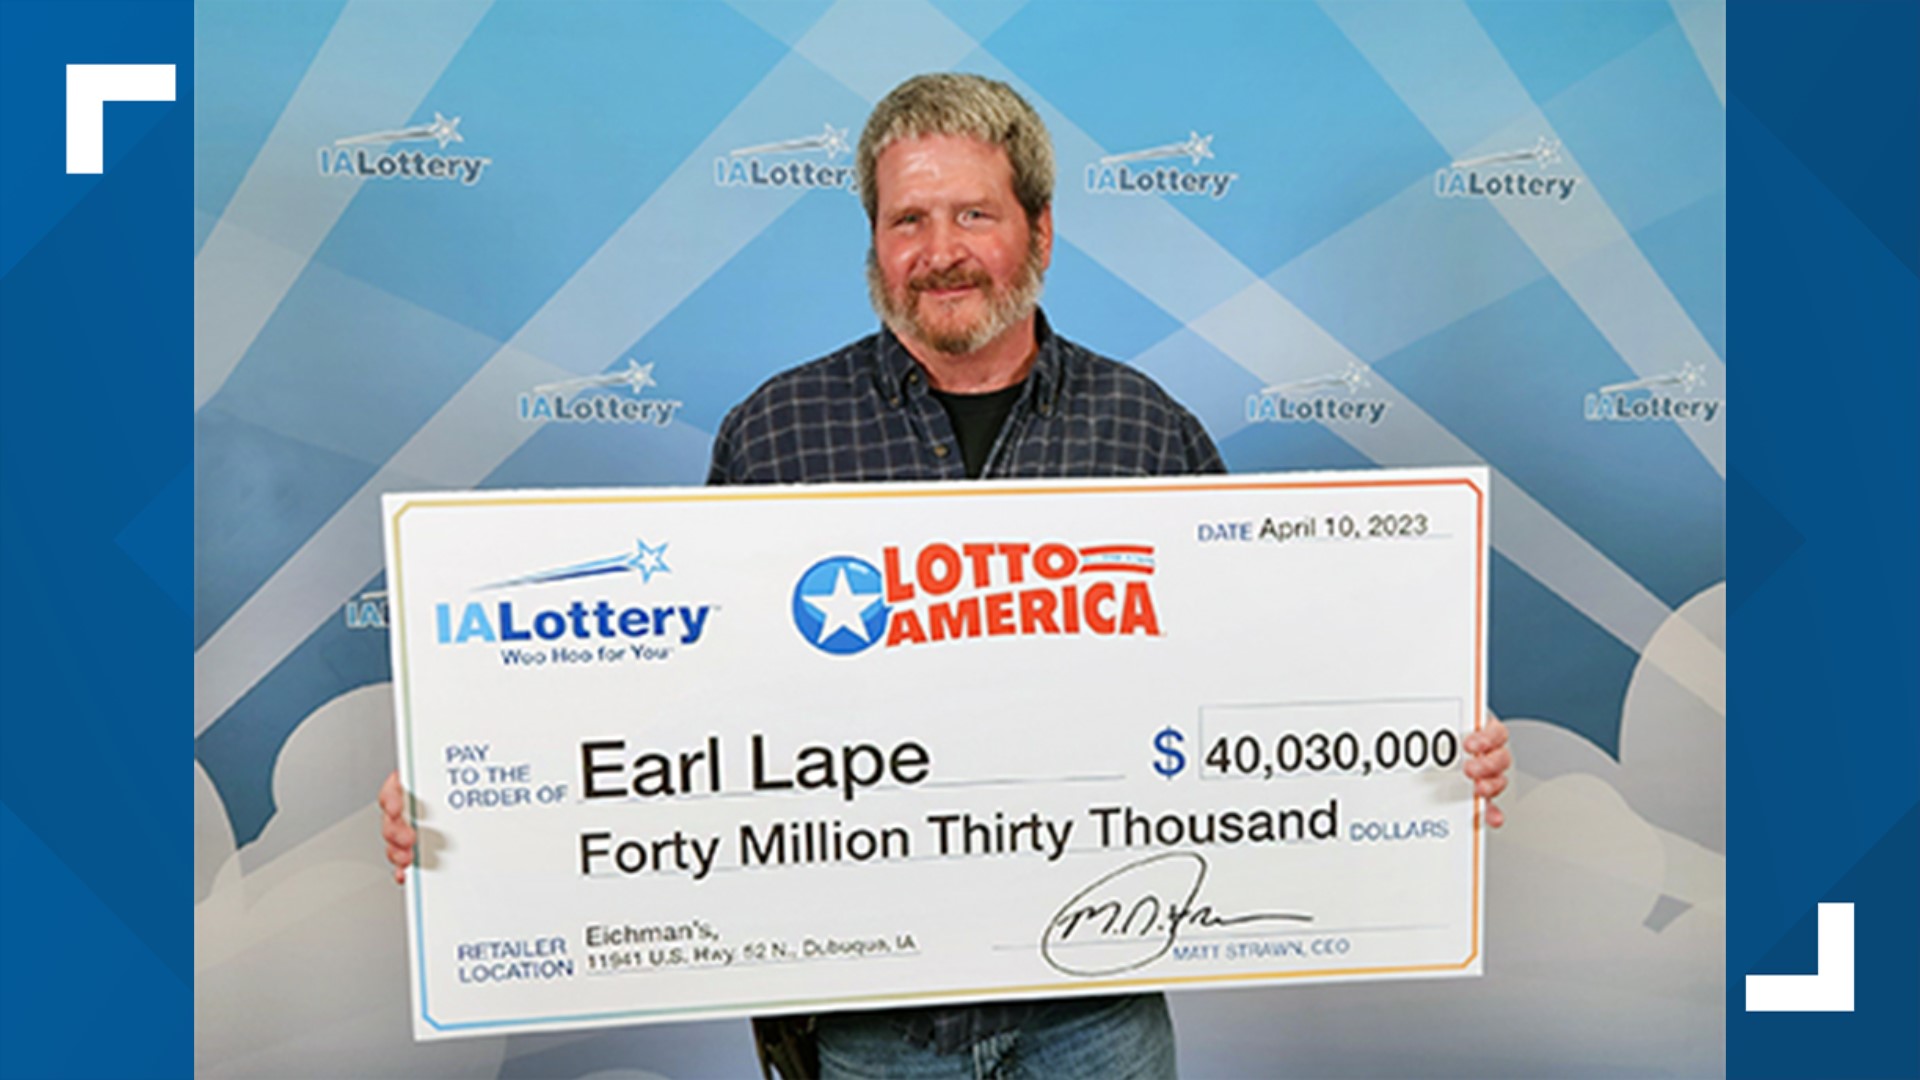 “I laughed. I thought it was April Fools,” Earl Lape said after claiming his prize at the Iowa Lottery headquarters in Clive.